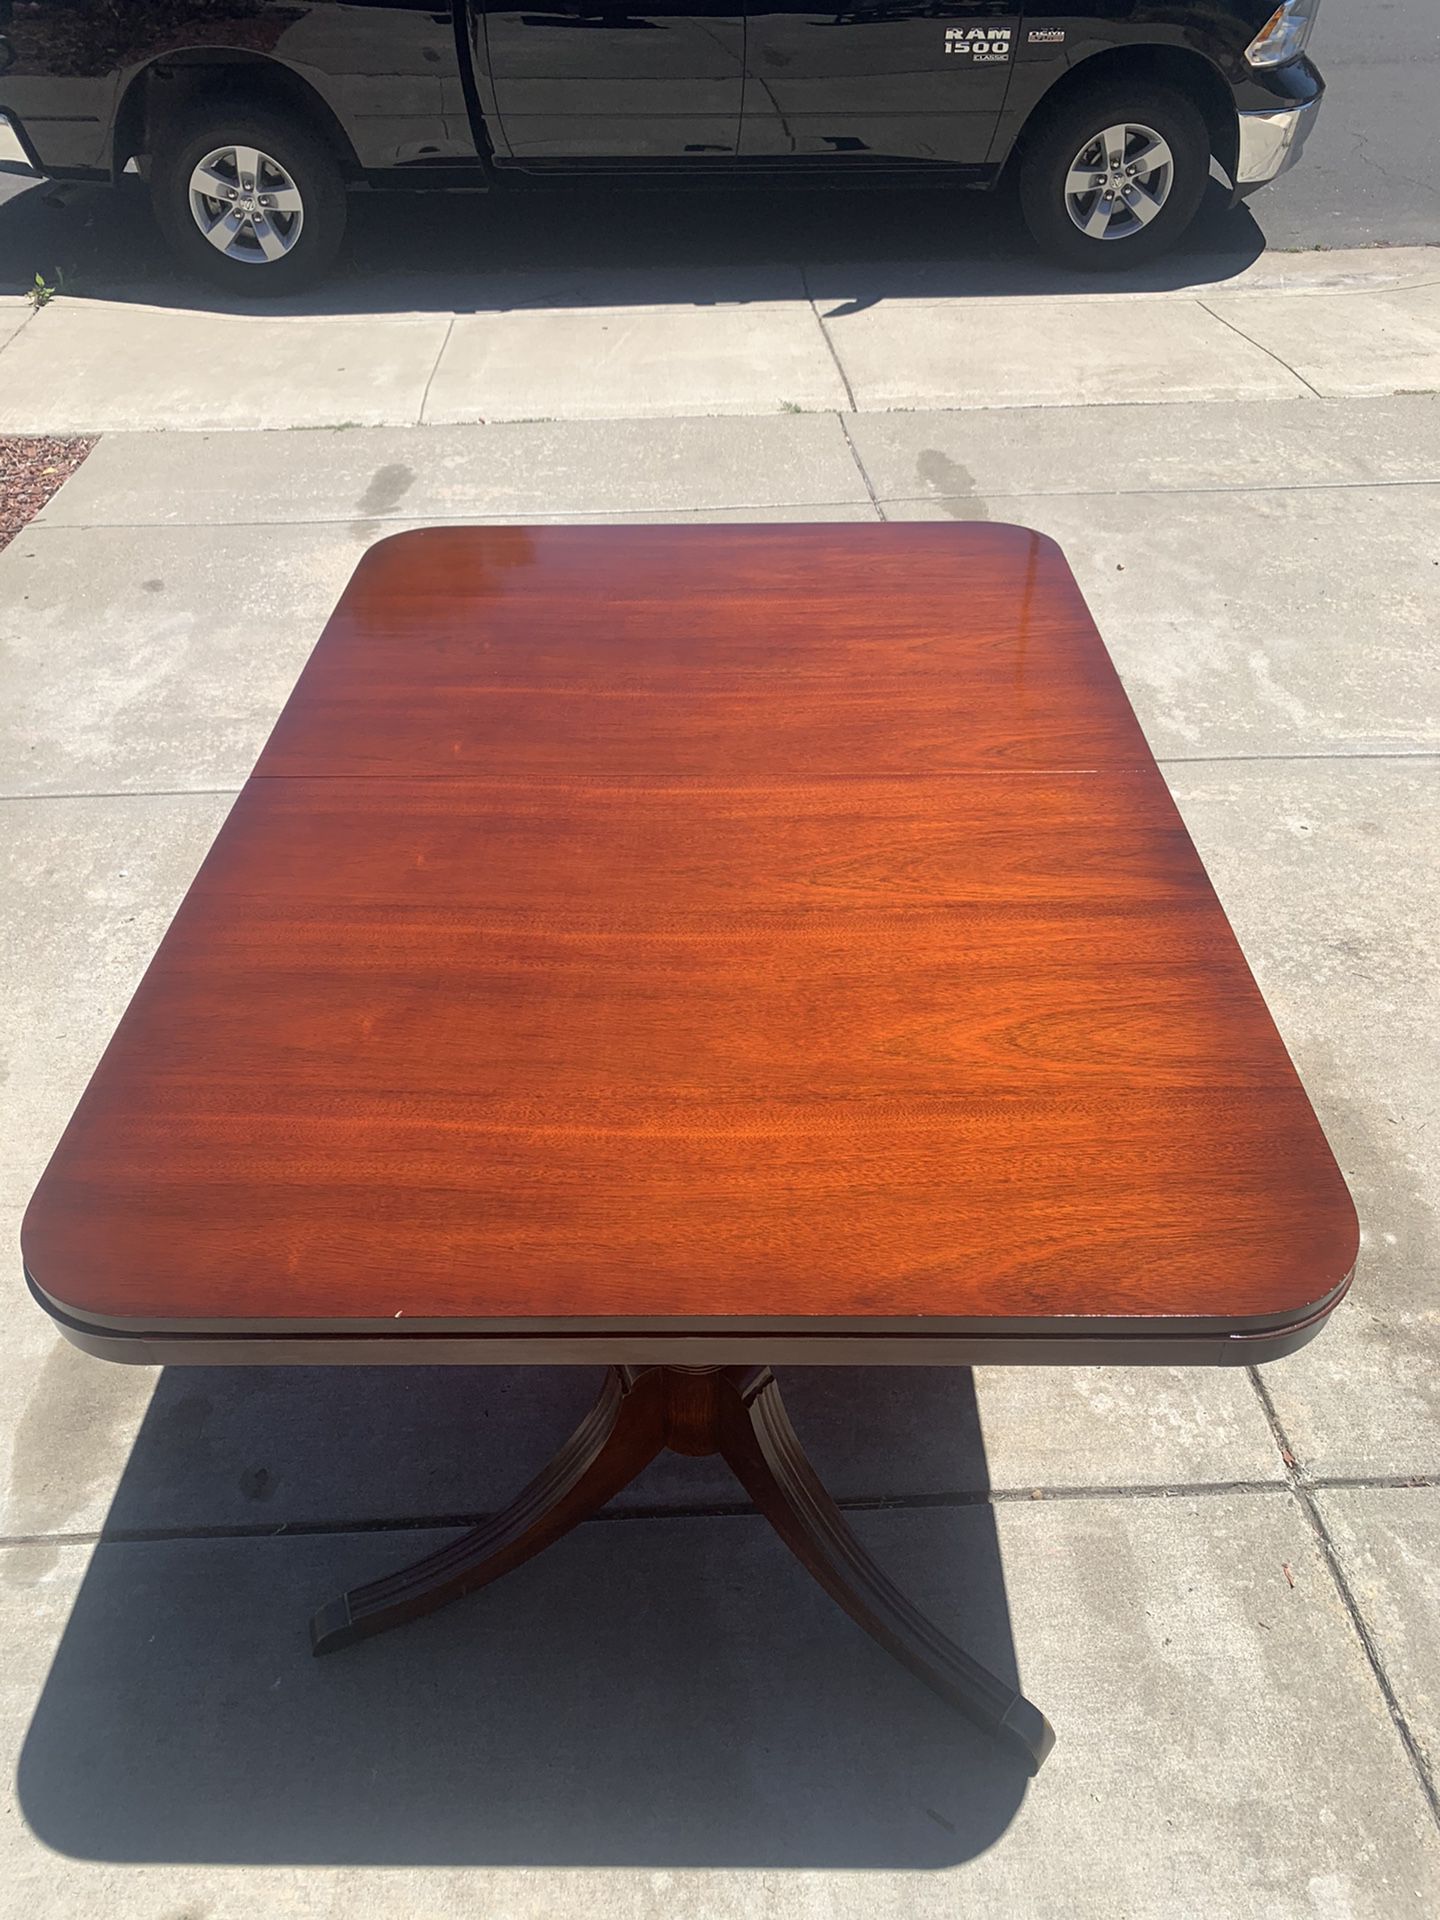 FREE !! 1956 Antique Mahogany Table and Chair Set